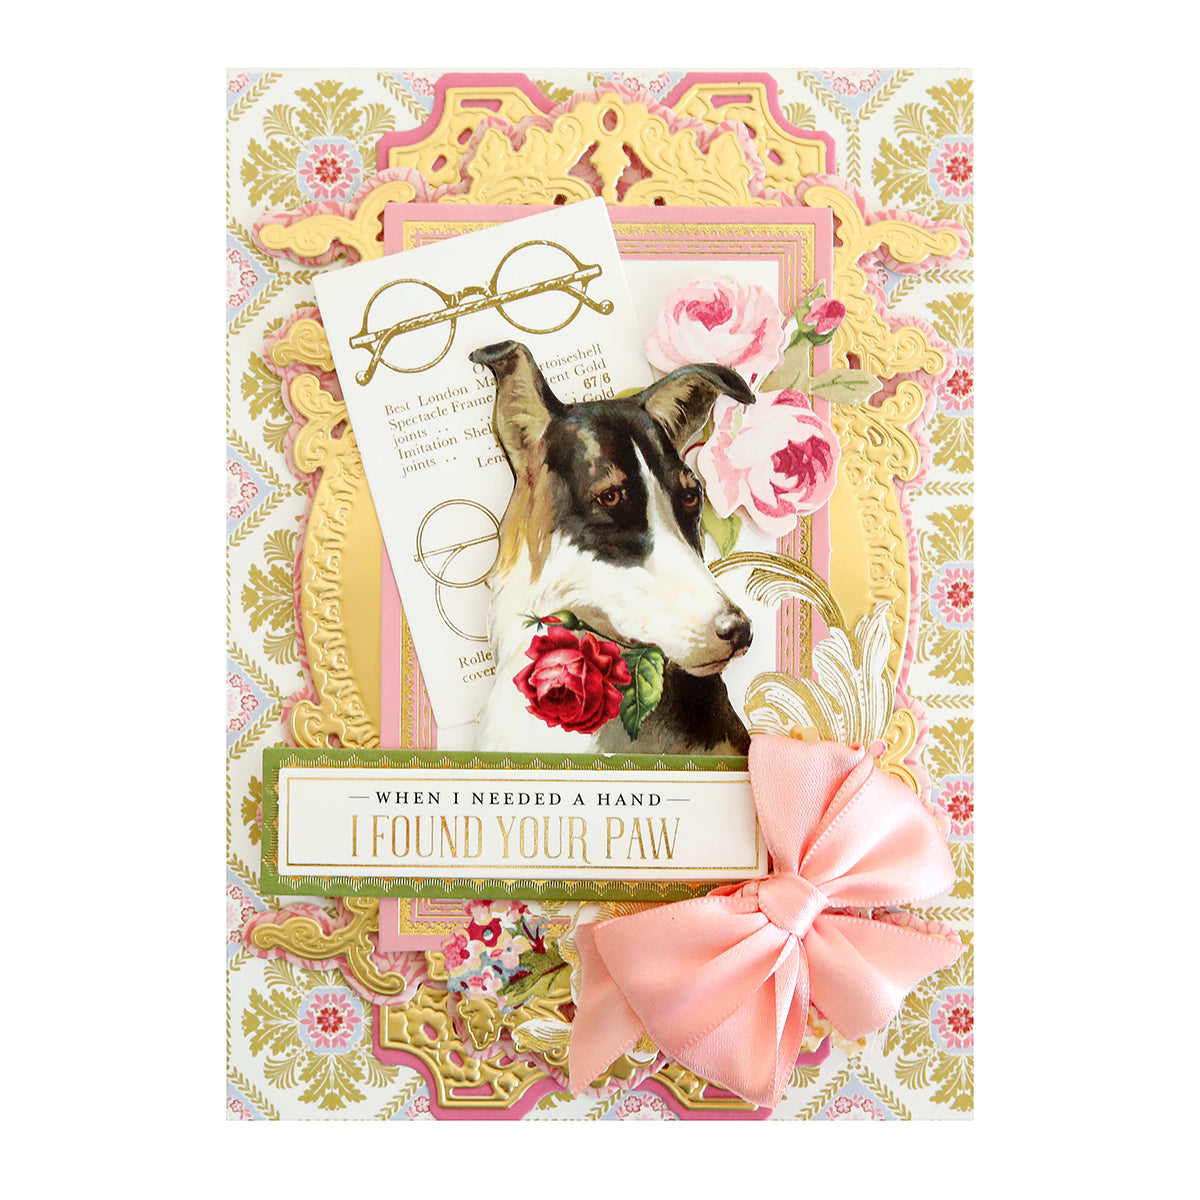 A whimsical greeting card featuring Fur Baby Dog Stickers and Sentiments, adorned with floral decorations and a pink bow, with the phrase "when I needed a hand I found your paw".